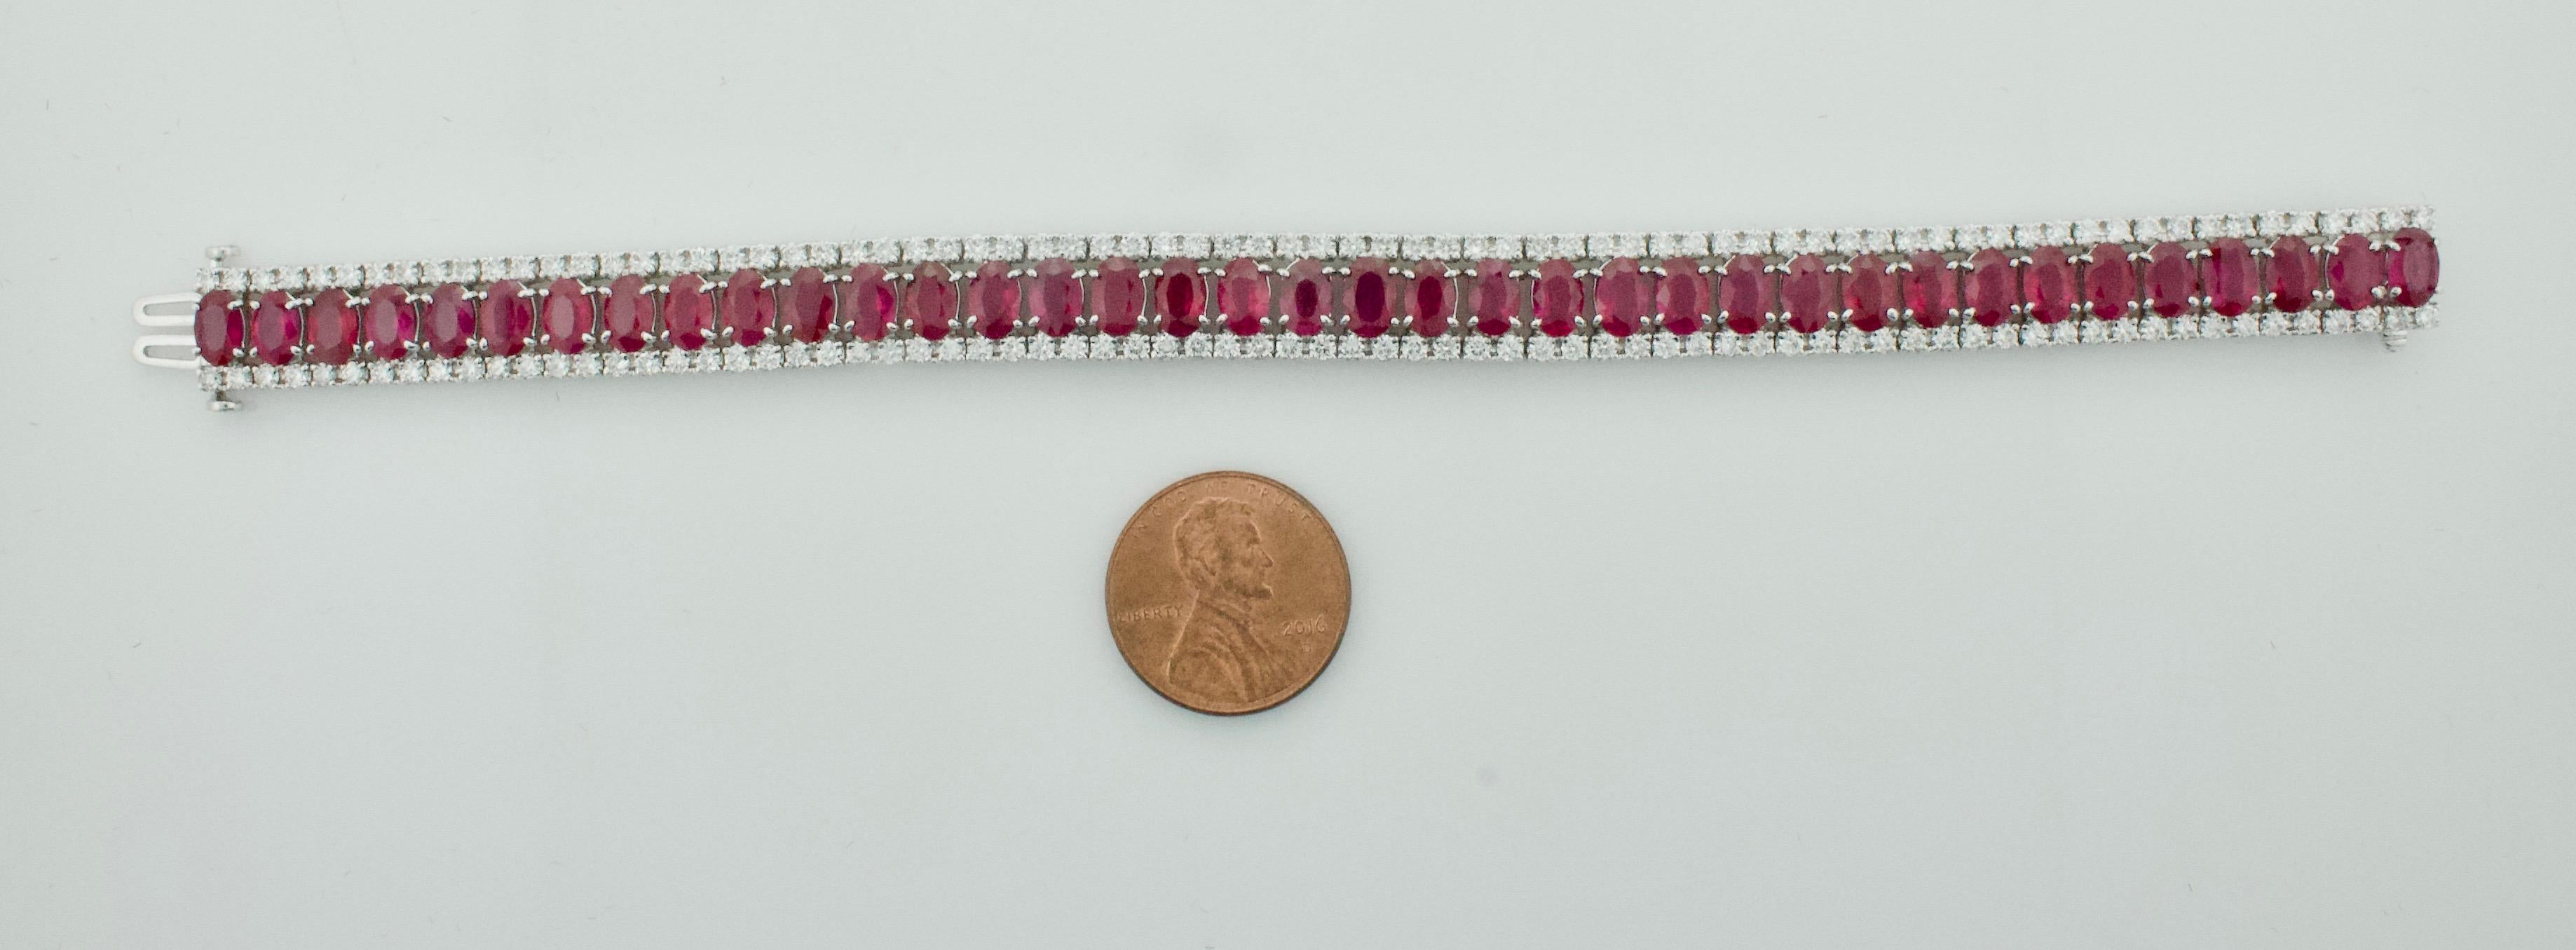 Burmese Ruby and Diamond Bracelet with GIA Certificate  20.00 carats of Rubies 
Thirty Eight Oval Burmese Rubies weighing 20.00 carats approximately [bright with no imperfections visible to the naked eye]
One Hundred and Fifty Two Round Brilliant